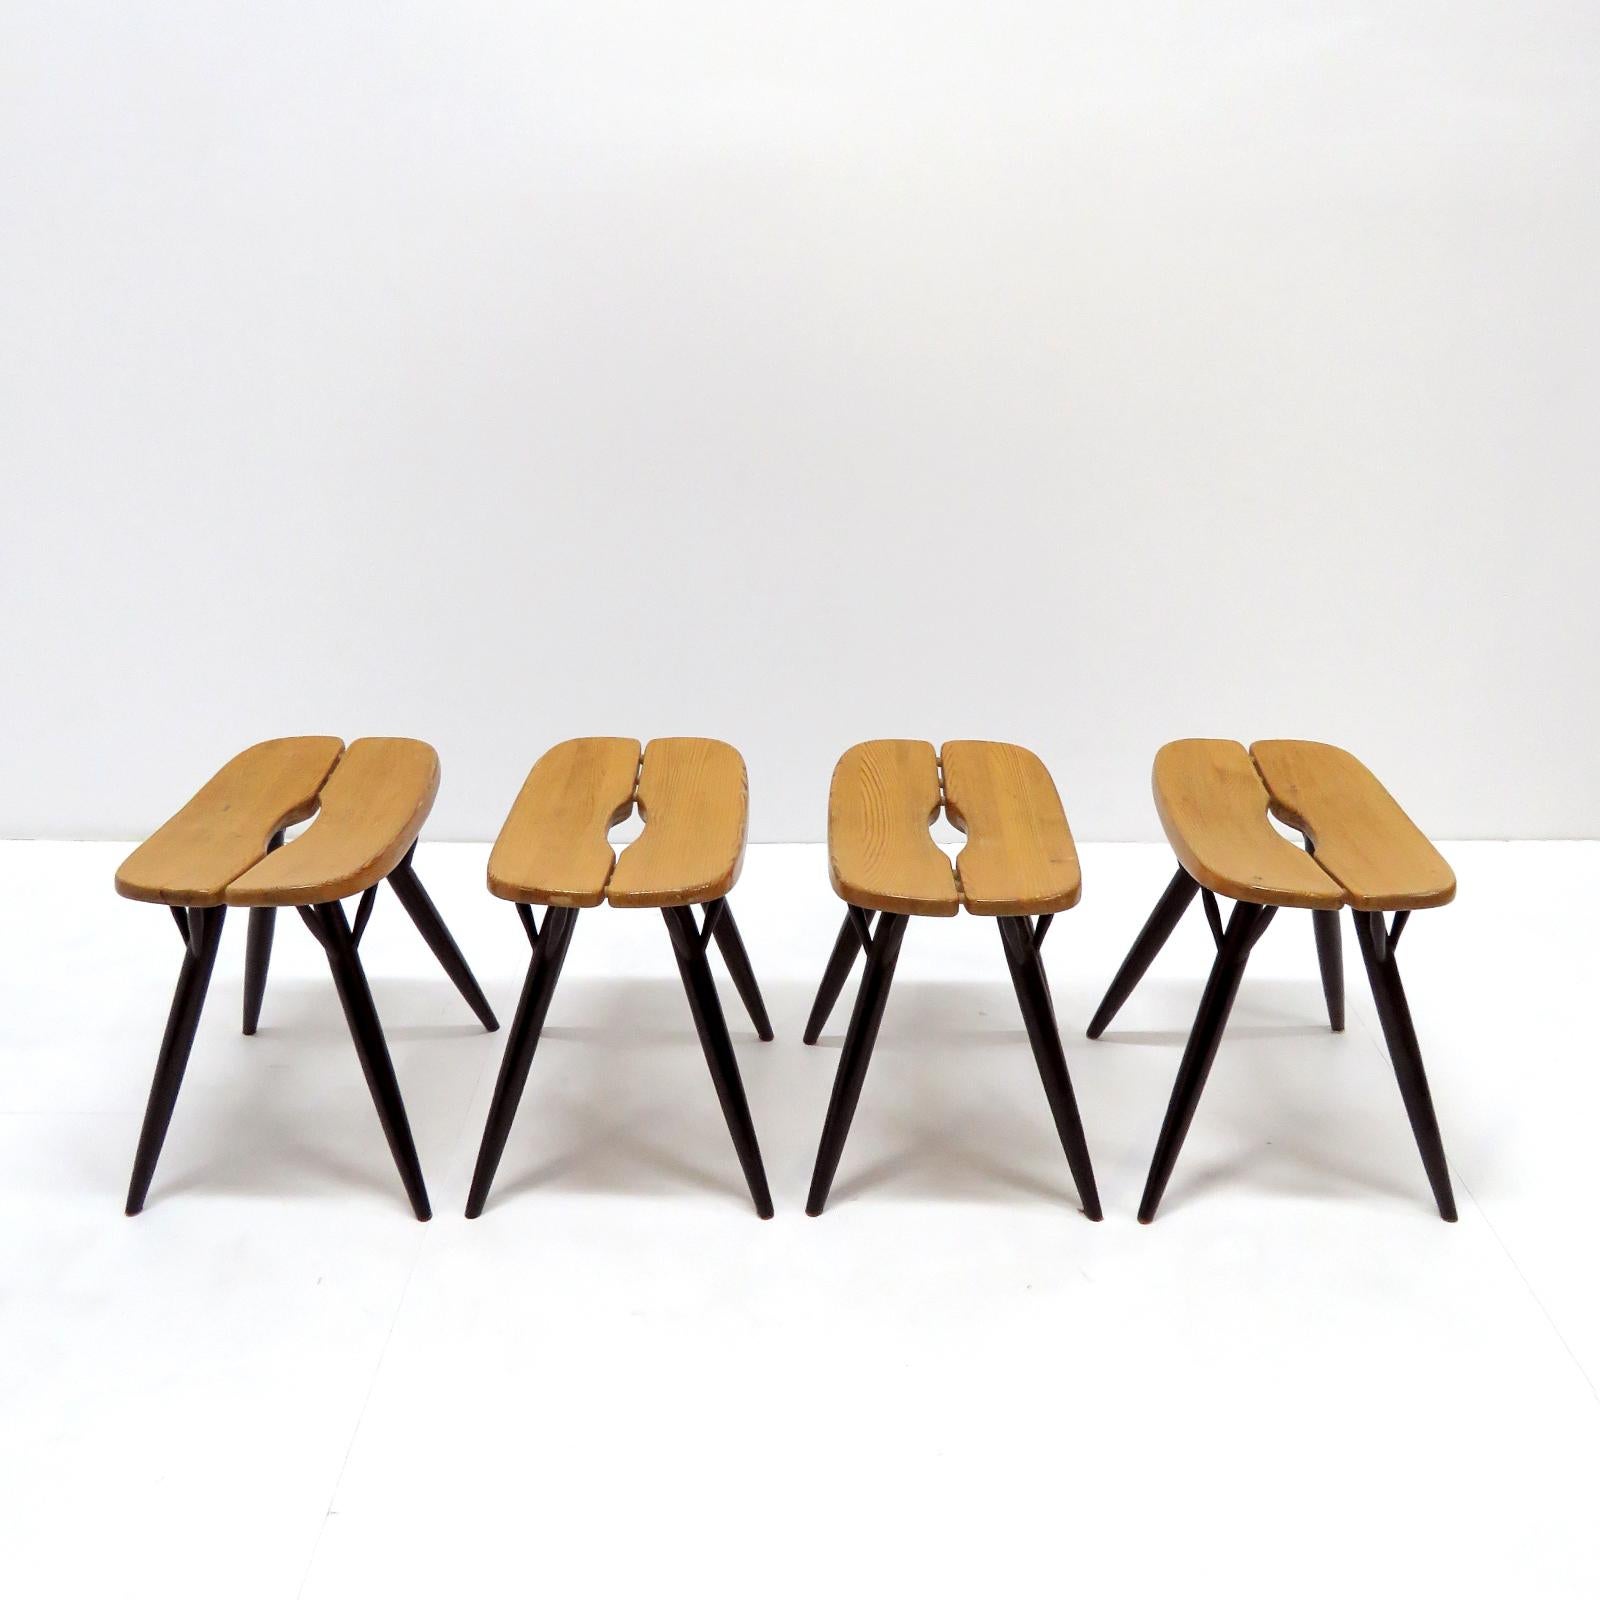 Wonderful stools designed by Ilmari Tapiovaara for Laukaan Puu, Finland 1955 in pinewood and black lacquered dowel legs, marked, priced individually.